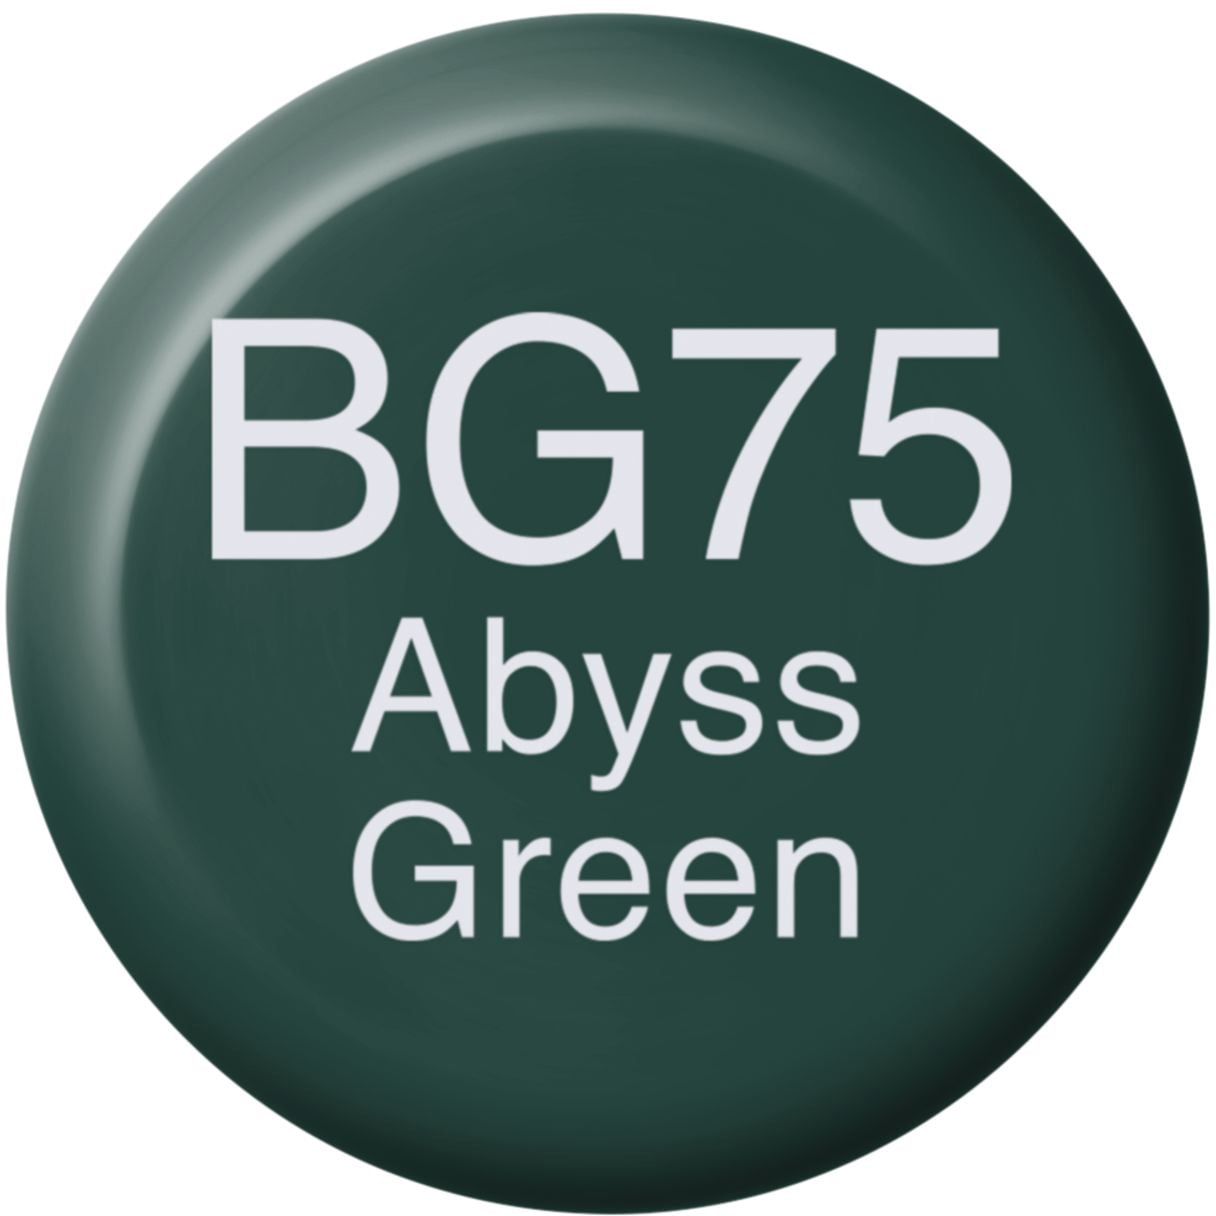 COPIC Ink Refill 21076318 BG75 - Abyss Green BG75 - Abyss Green